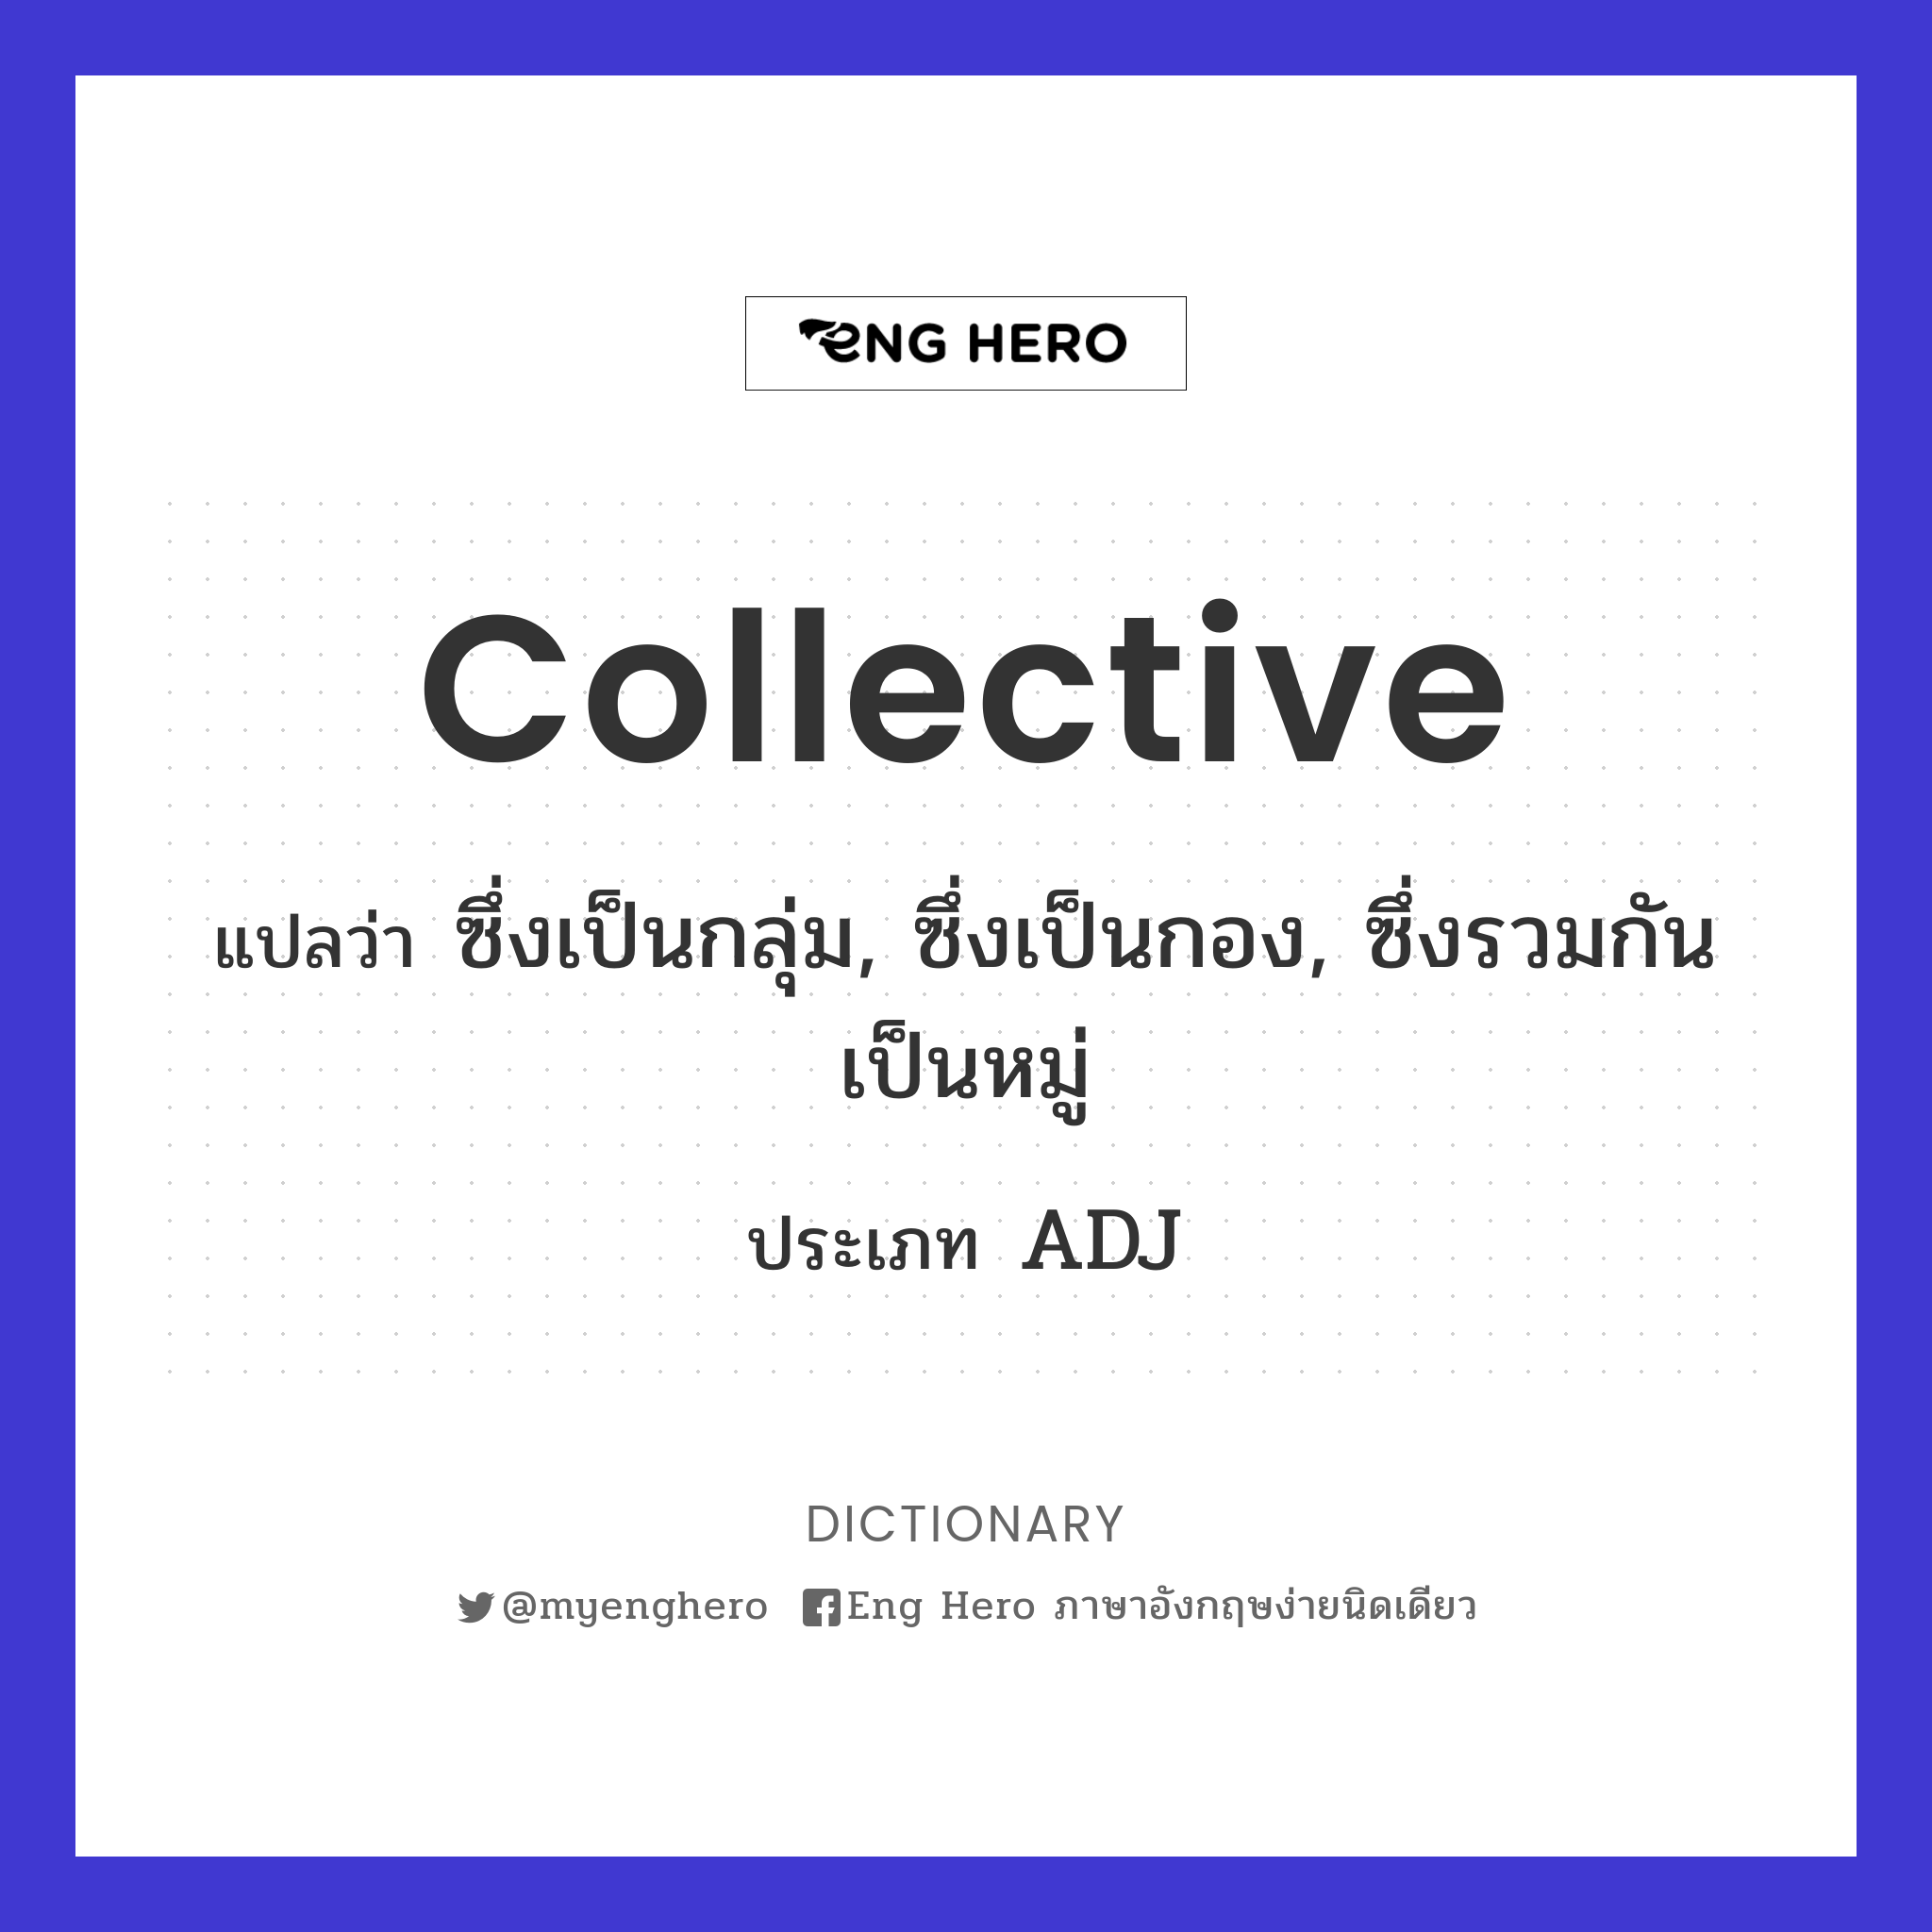 collective